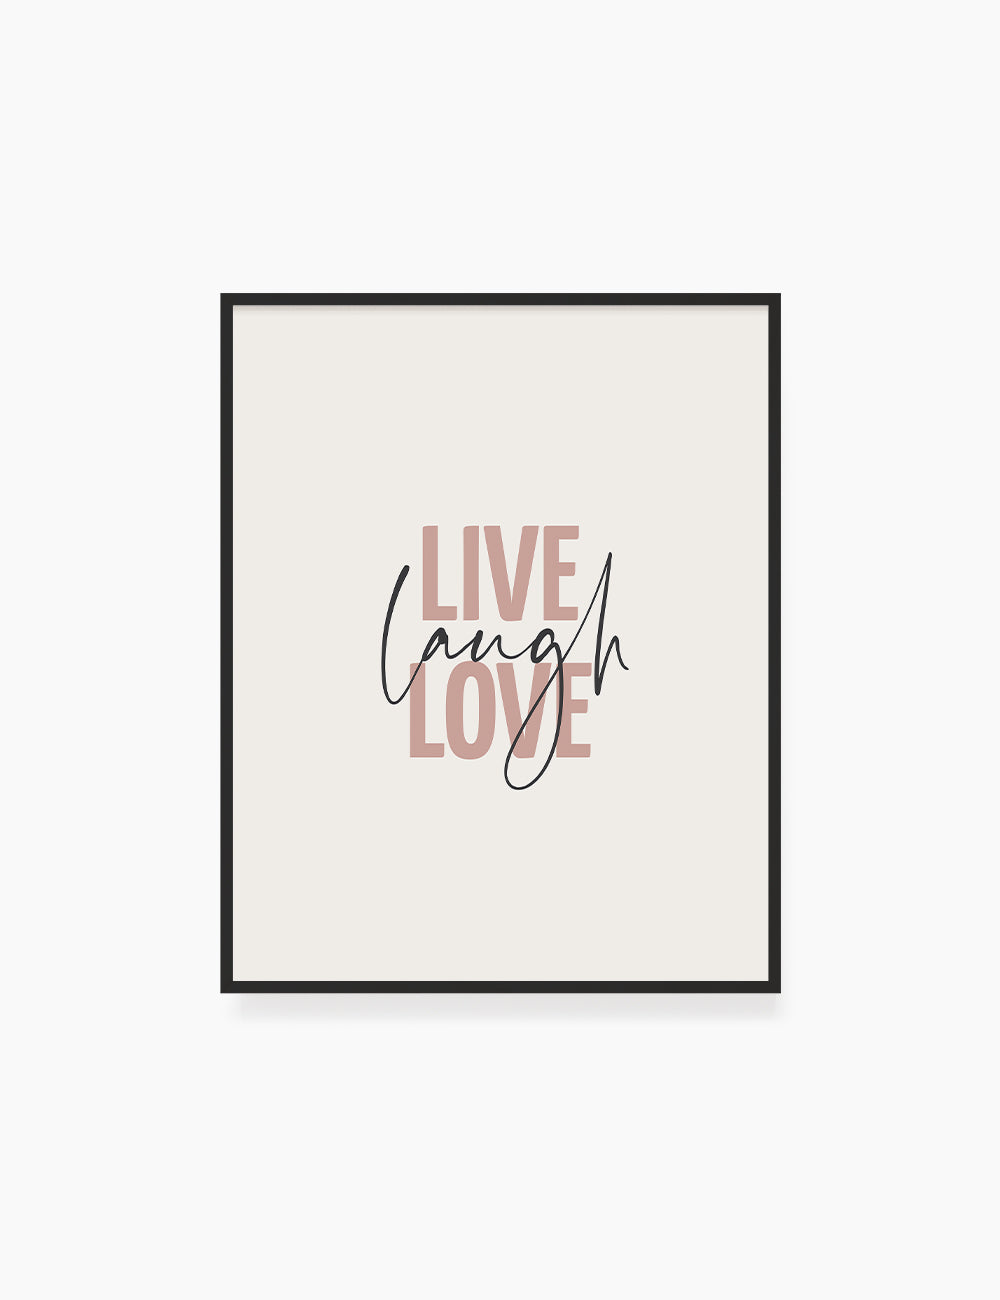 LIVE. LAUGH. LOVE. Blush. Rose. Pale Red. Beige. Inspirational quote. Printable Wall Art Quote.  - PAPER MOON Art & Design